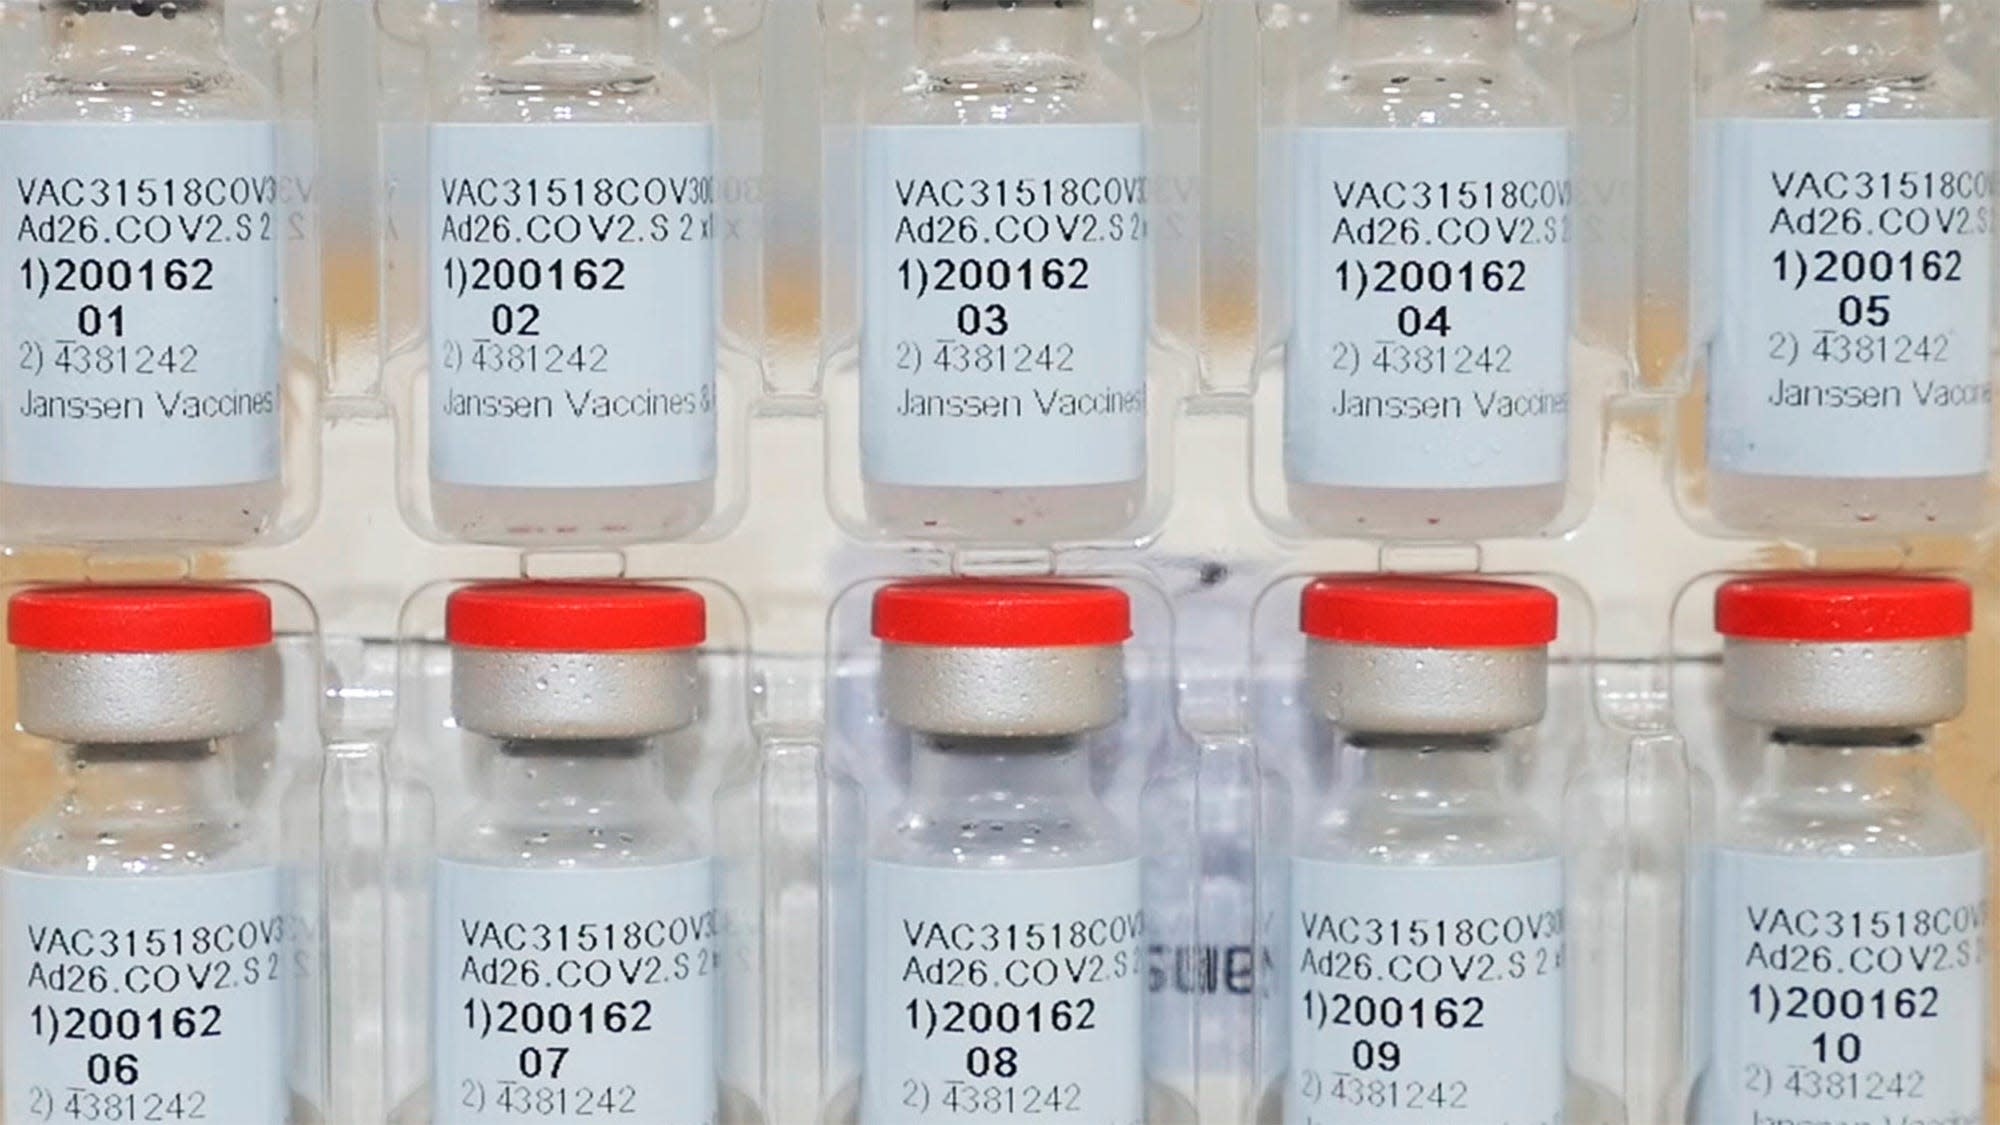 FDA authorizes Johnson & Johnson’s single-dose COVID vaccine, doses expected to start rolling out next week